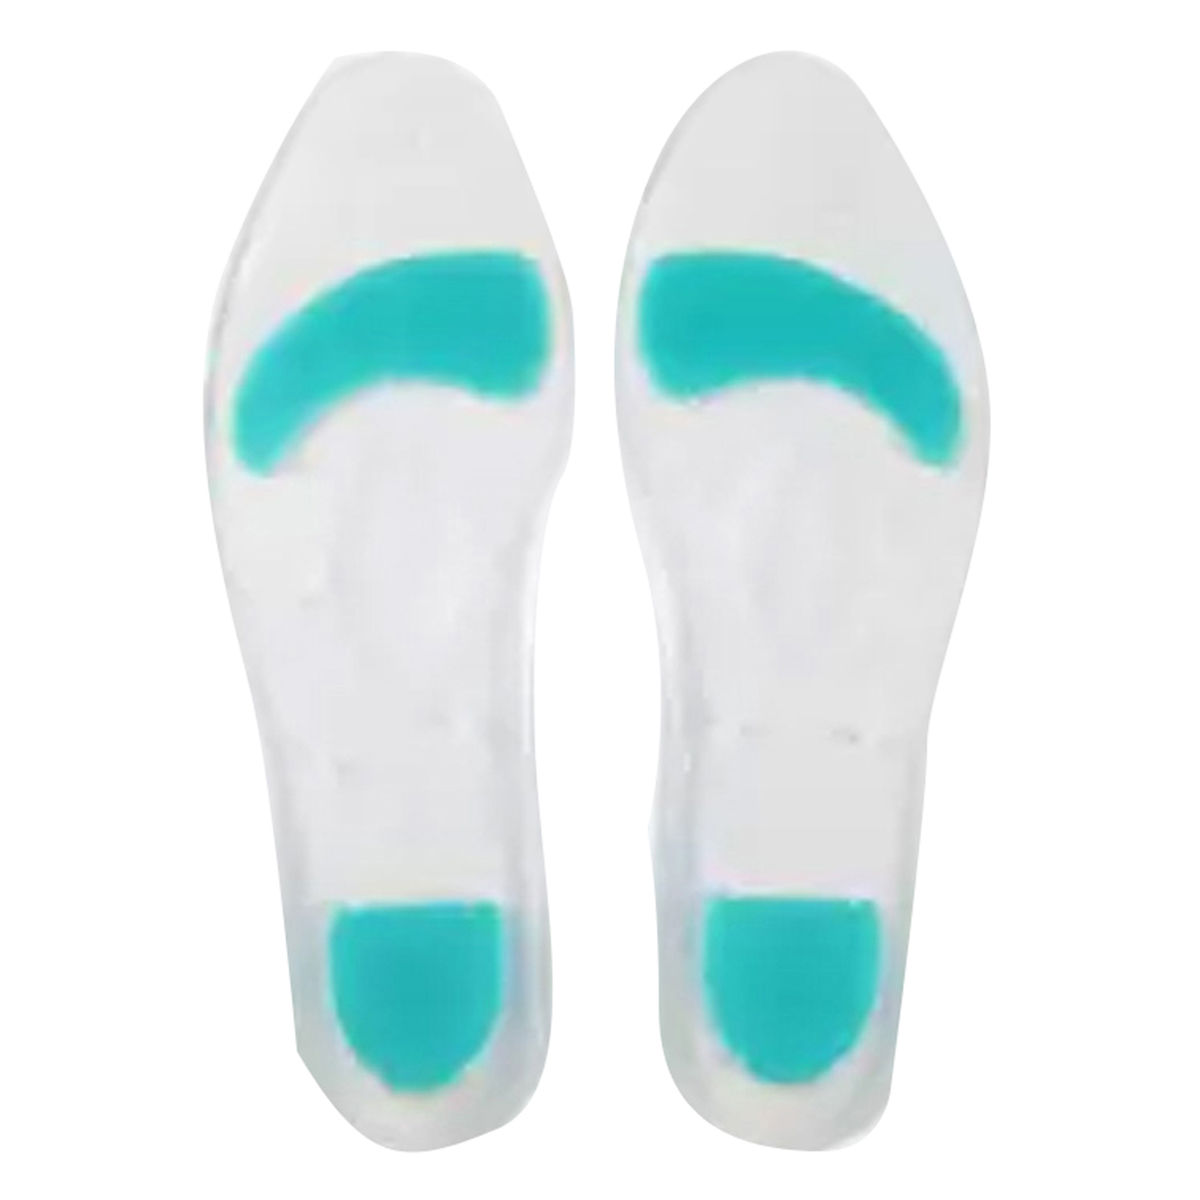 Tynor Silicon Insole Full Pair Large, 1 Pair | Uses, Side Effects ...